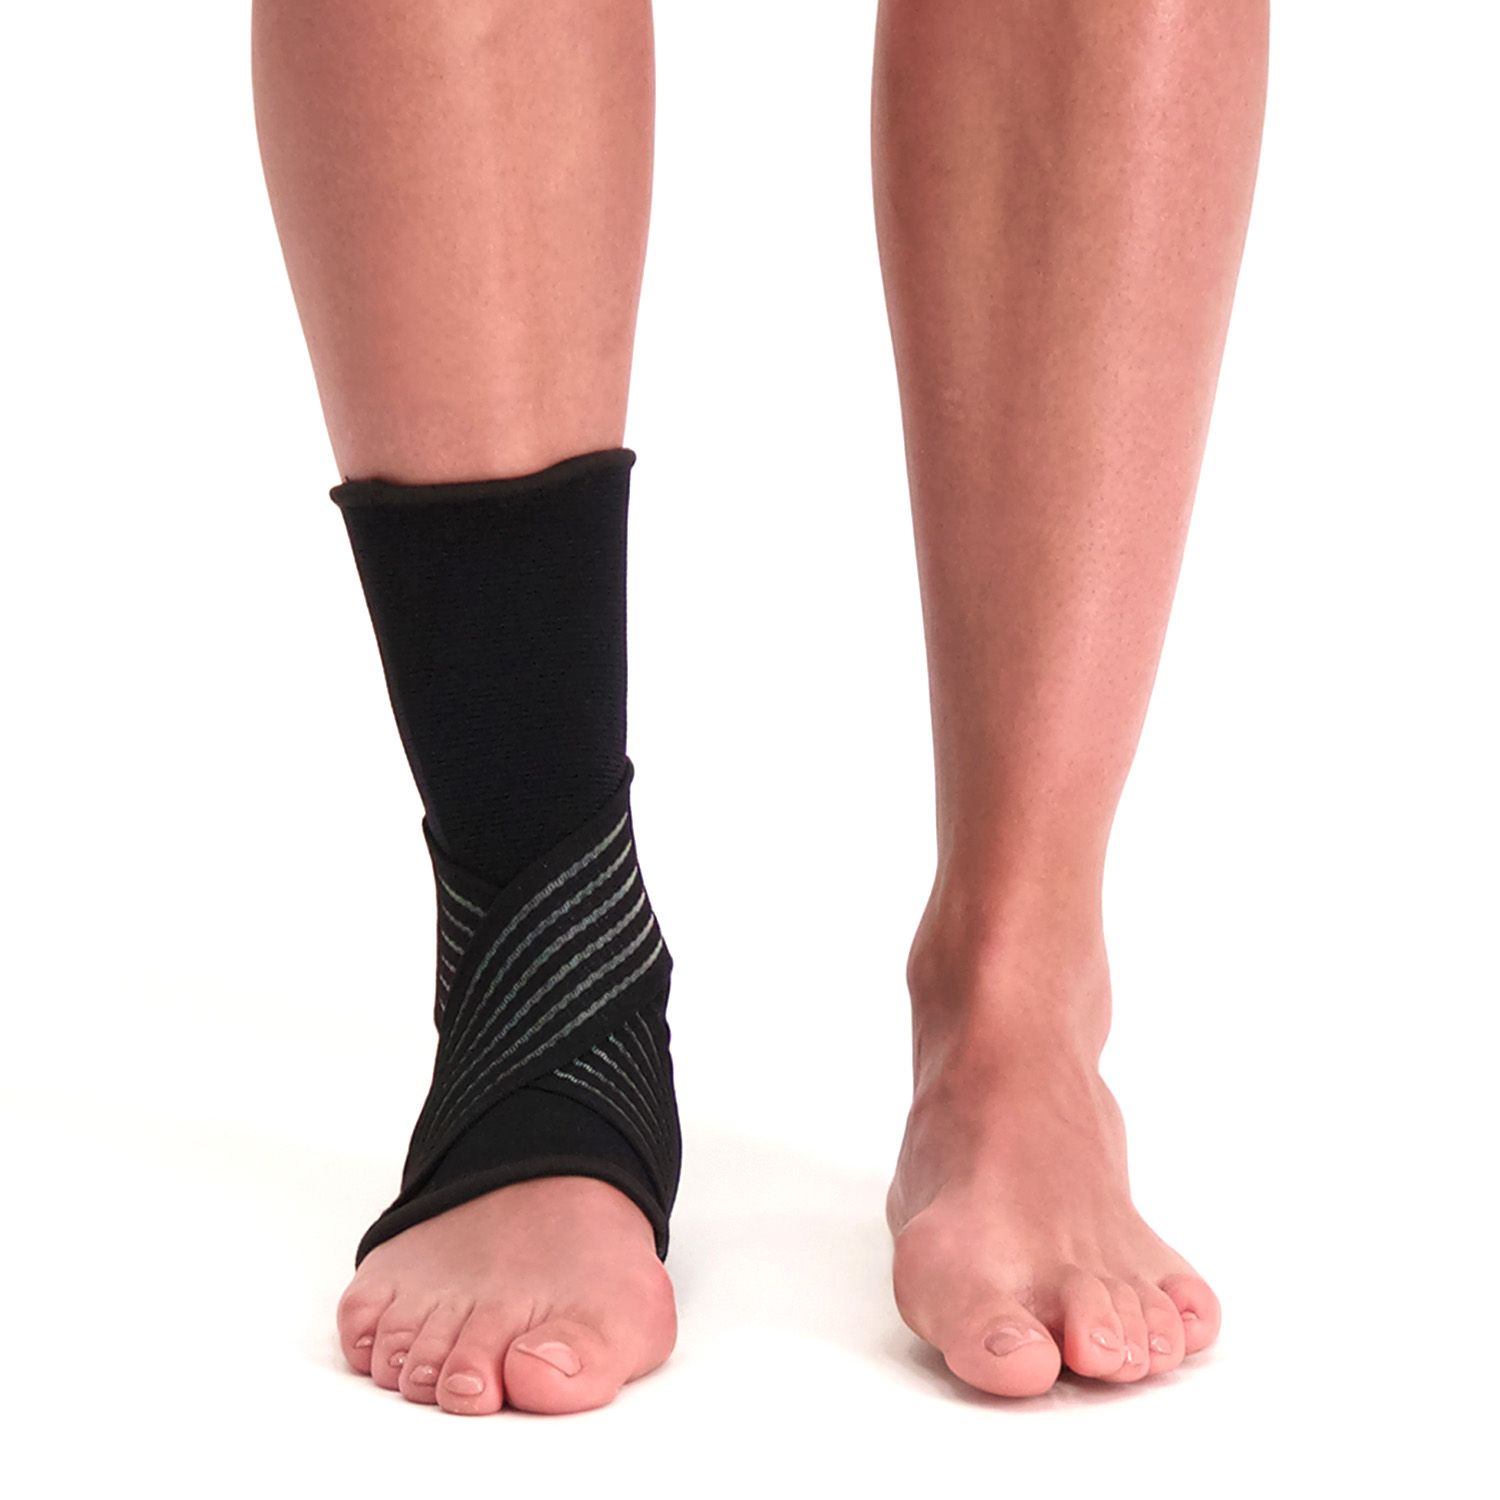 medidu premium ankle support side view